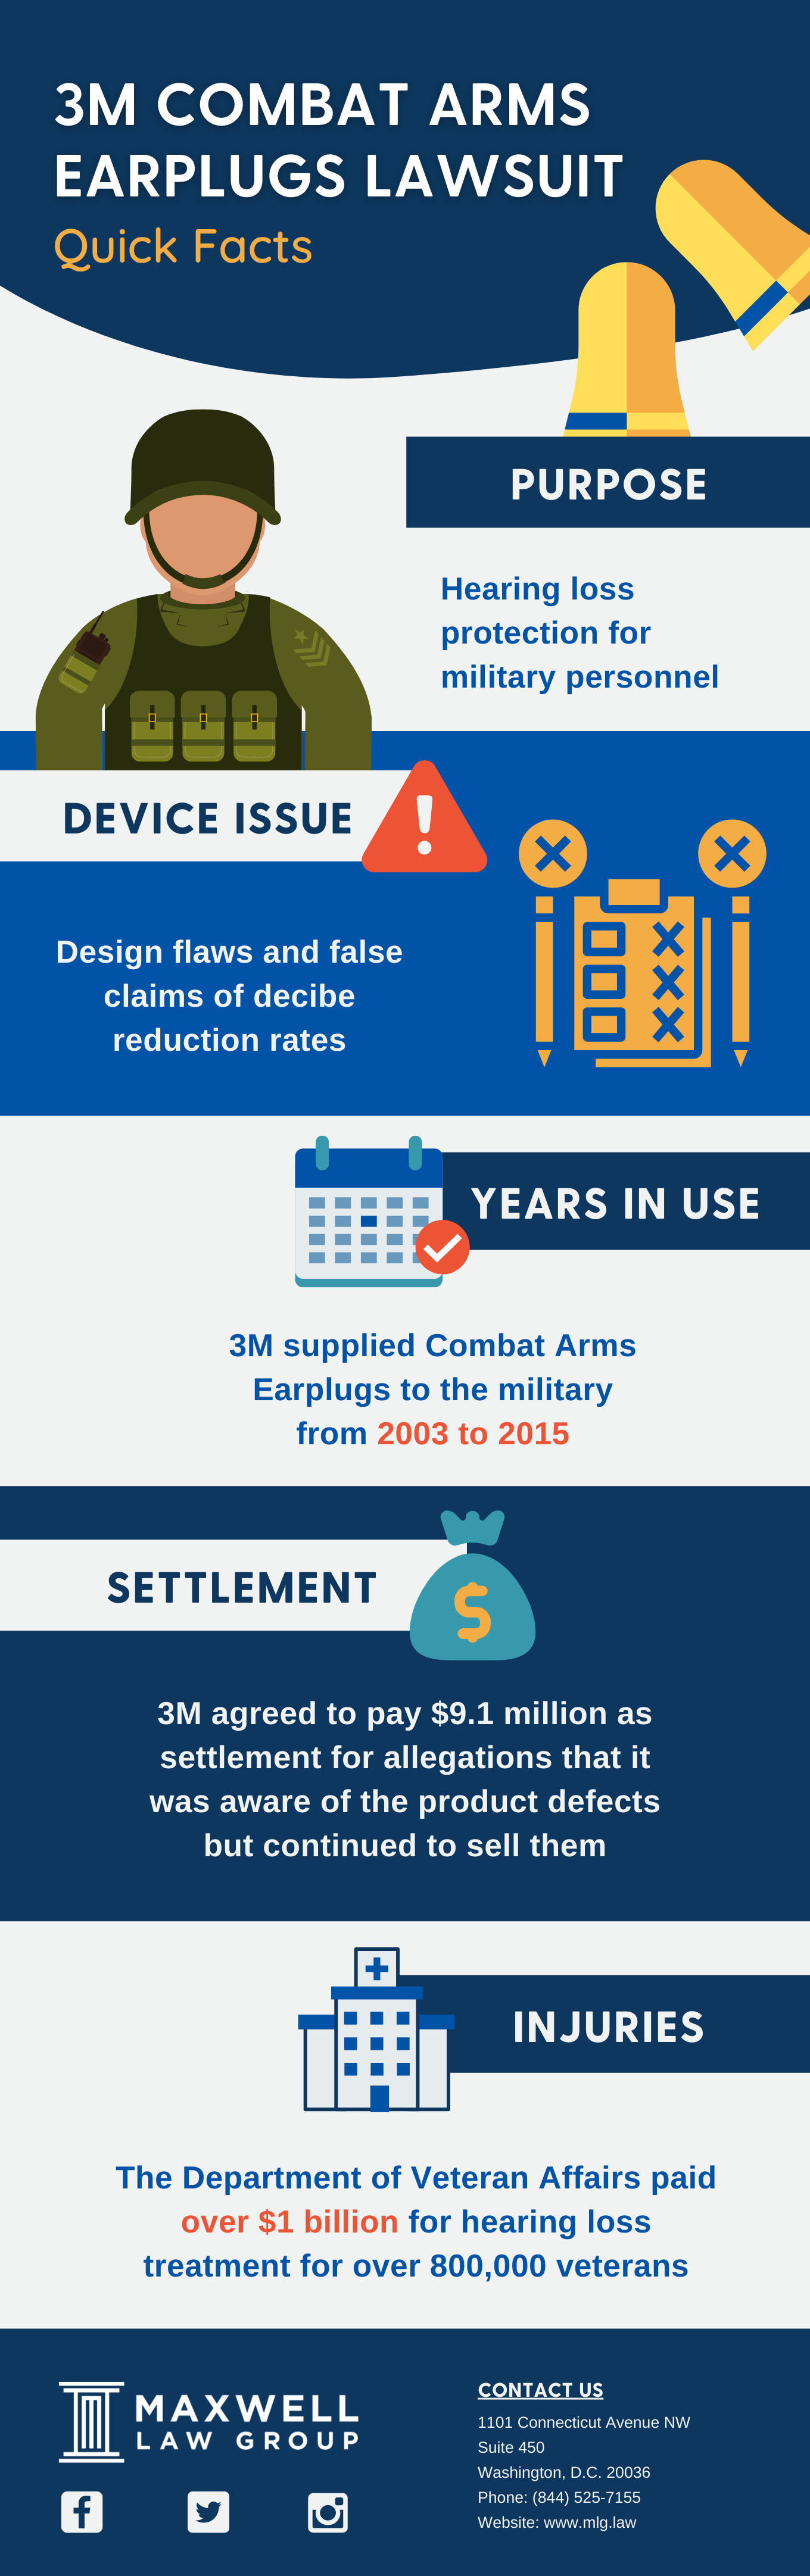 3M Earplugs Quick Facts infograph